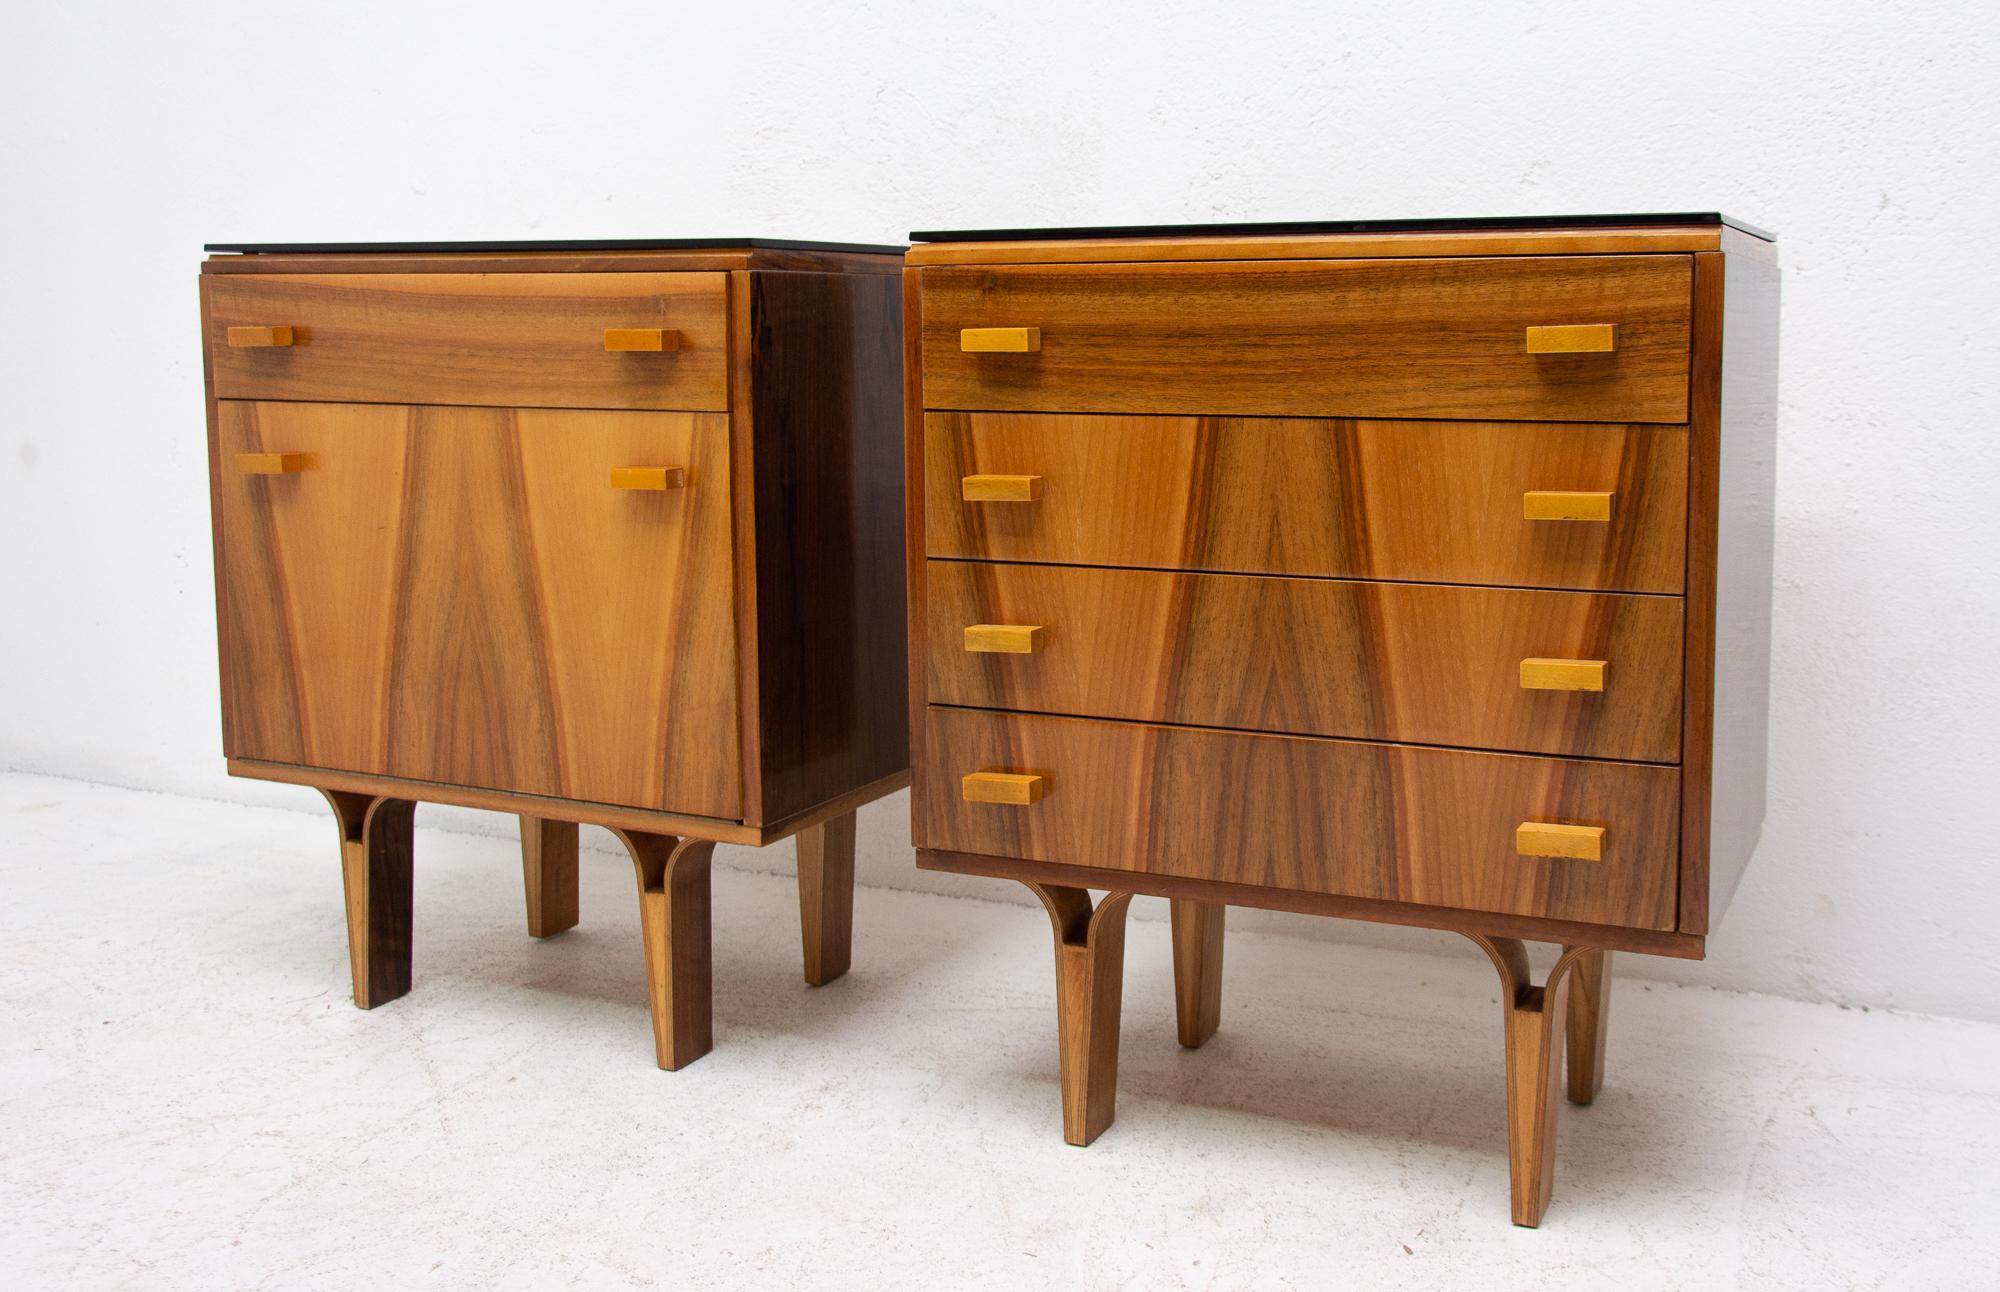 Midcentury Nightstands, Chest of Drawers by Nový Domov, 1970s, Czechoslovakia In Good Condition In Prague 8, CZ